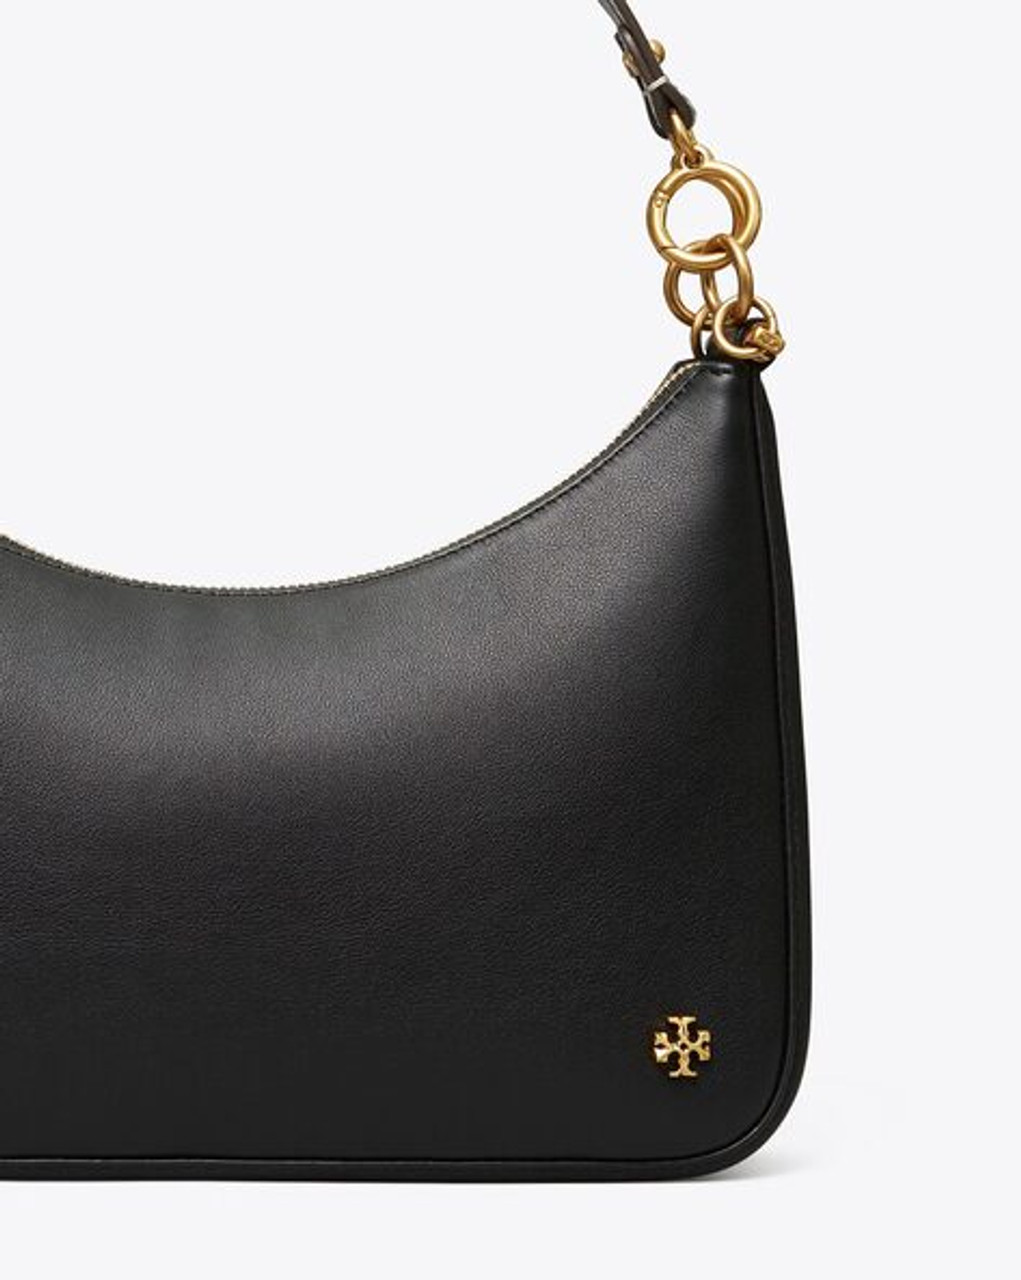 TORY BURCH Mercer Crescent Bag With Adjustable Strap